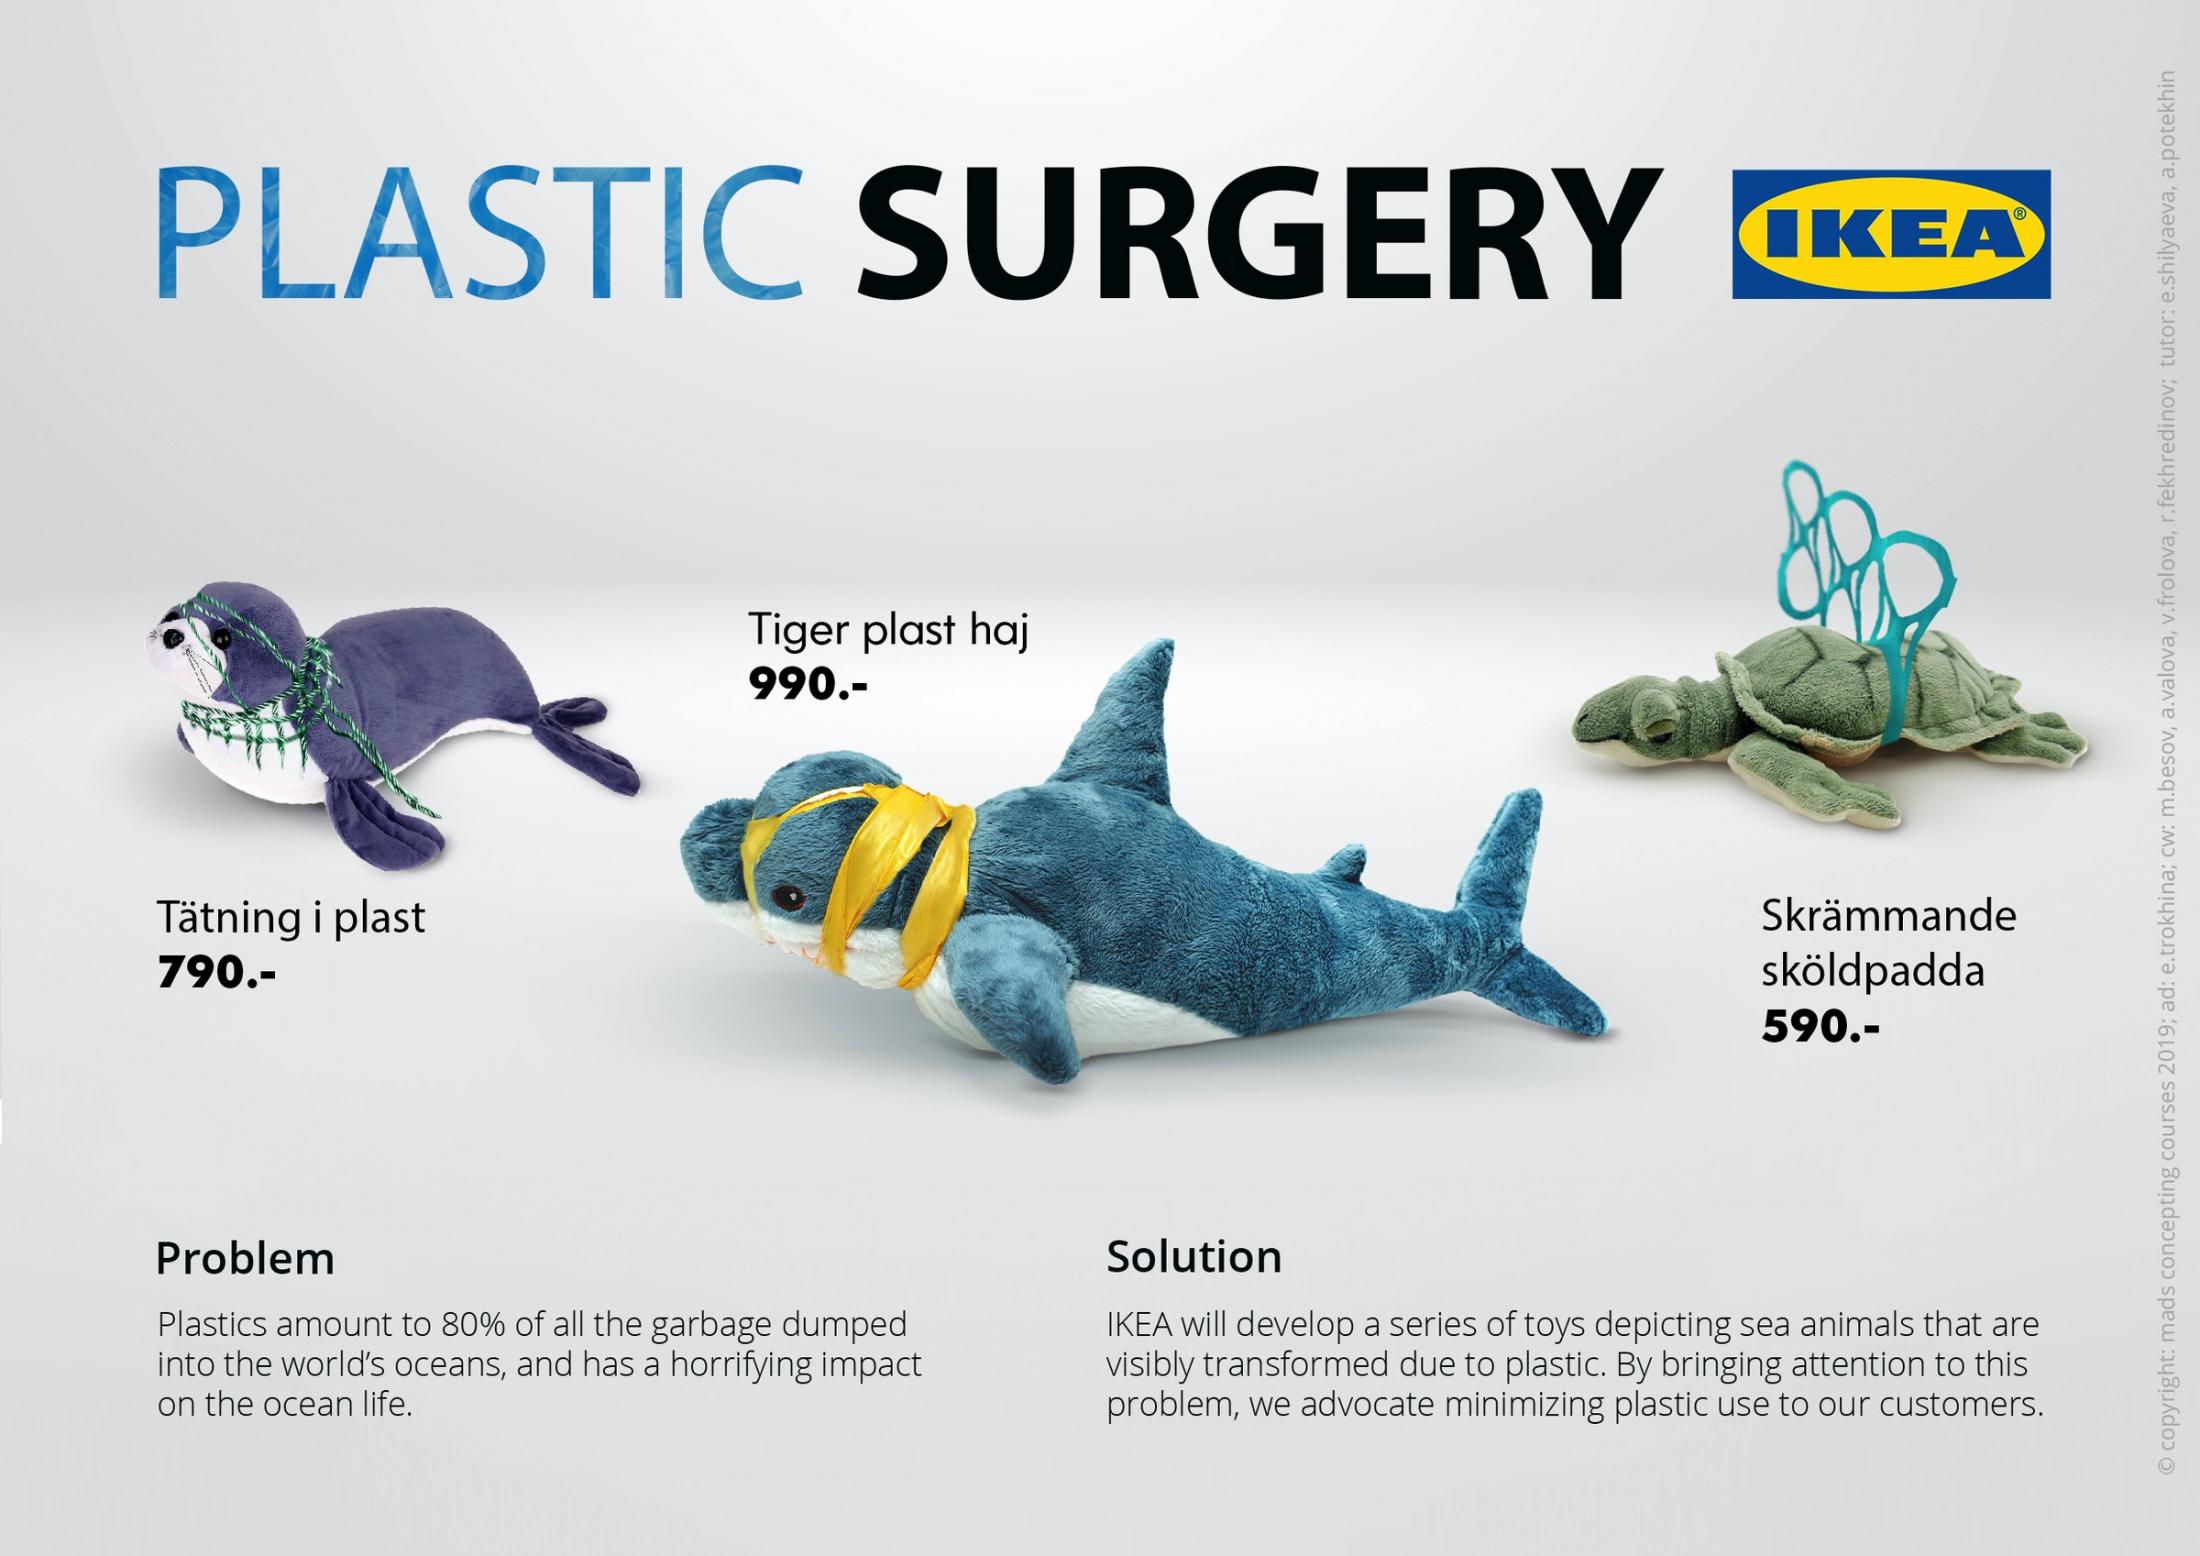 Plastic Surgery by IKEA